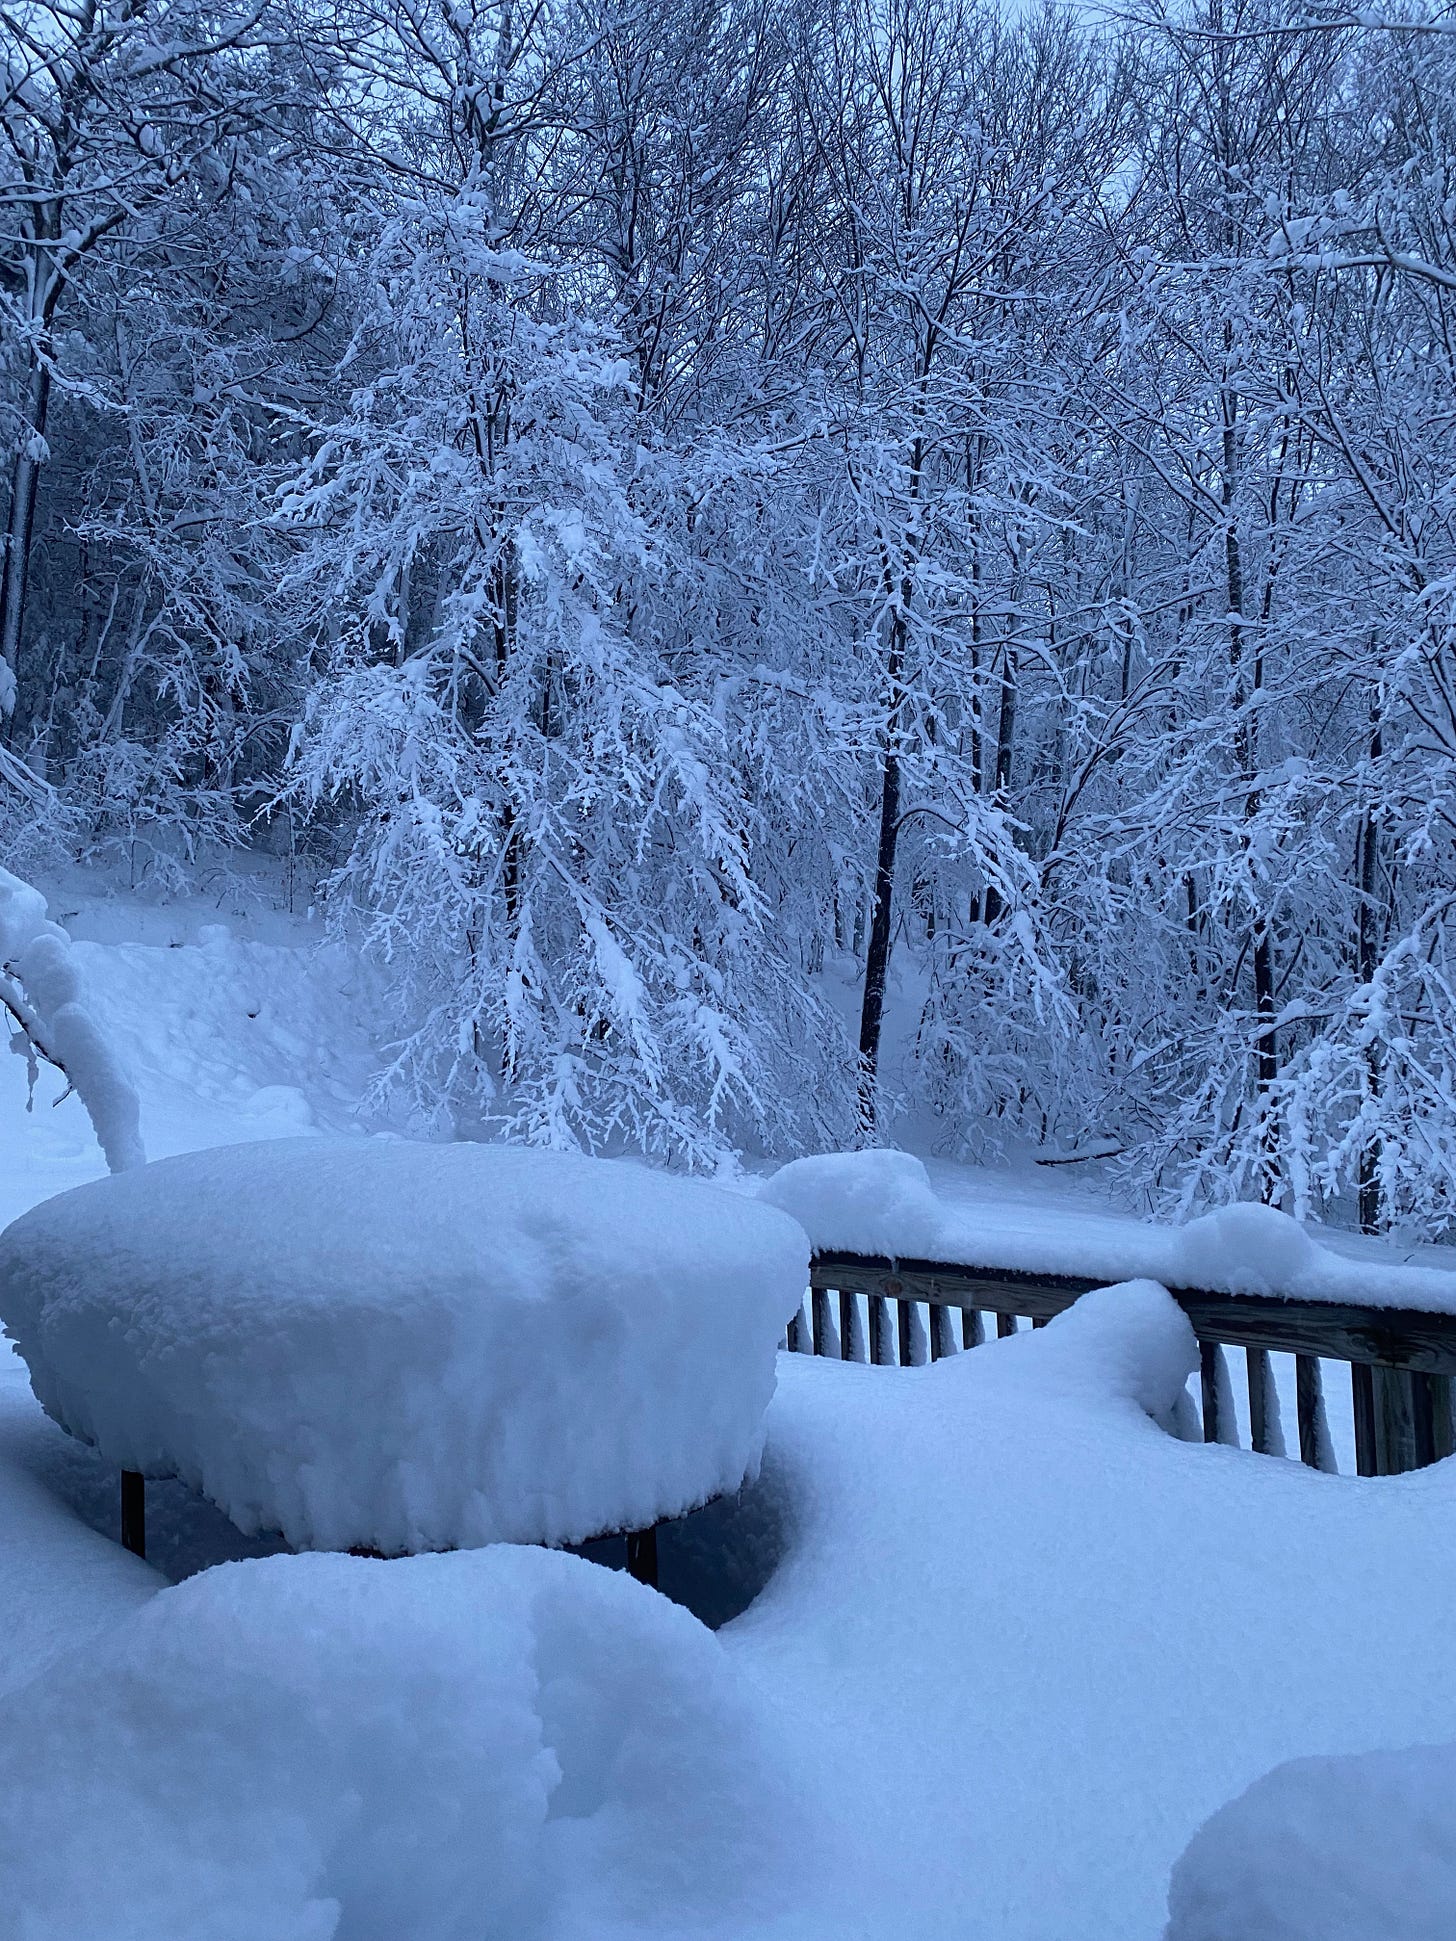 Two feet of snow piled on top of an outdoor table on my porch, surrounded by snow-covered trees.